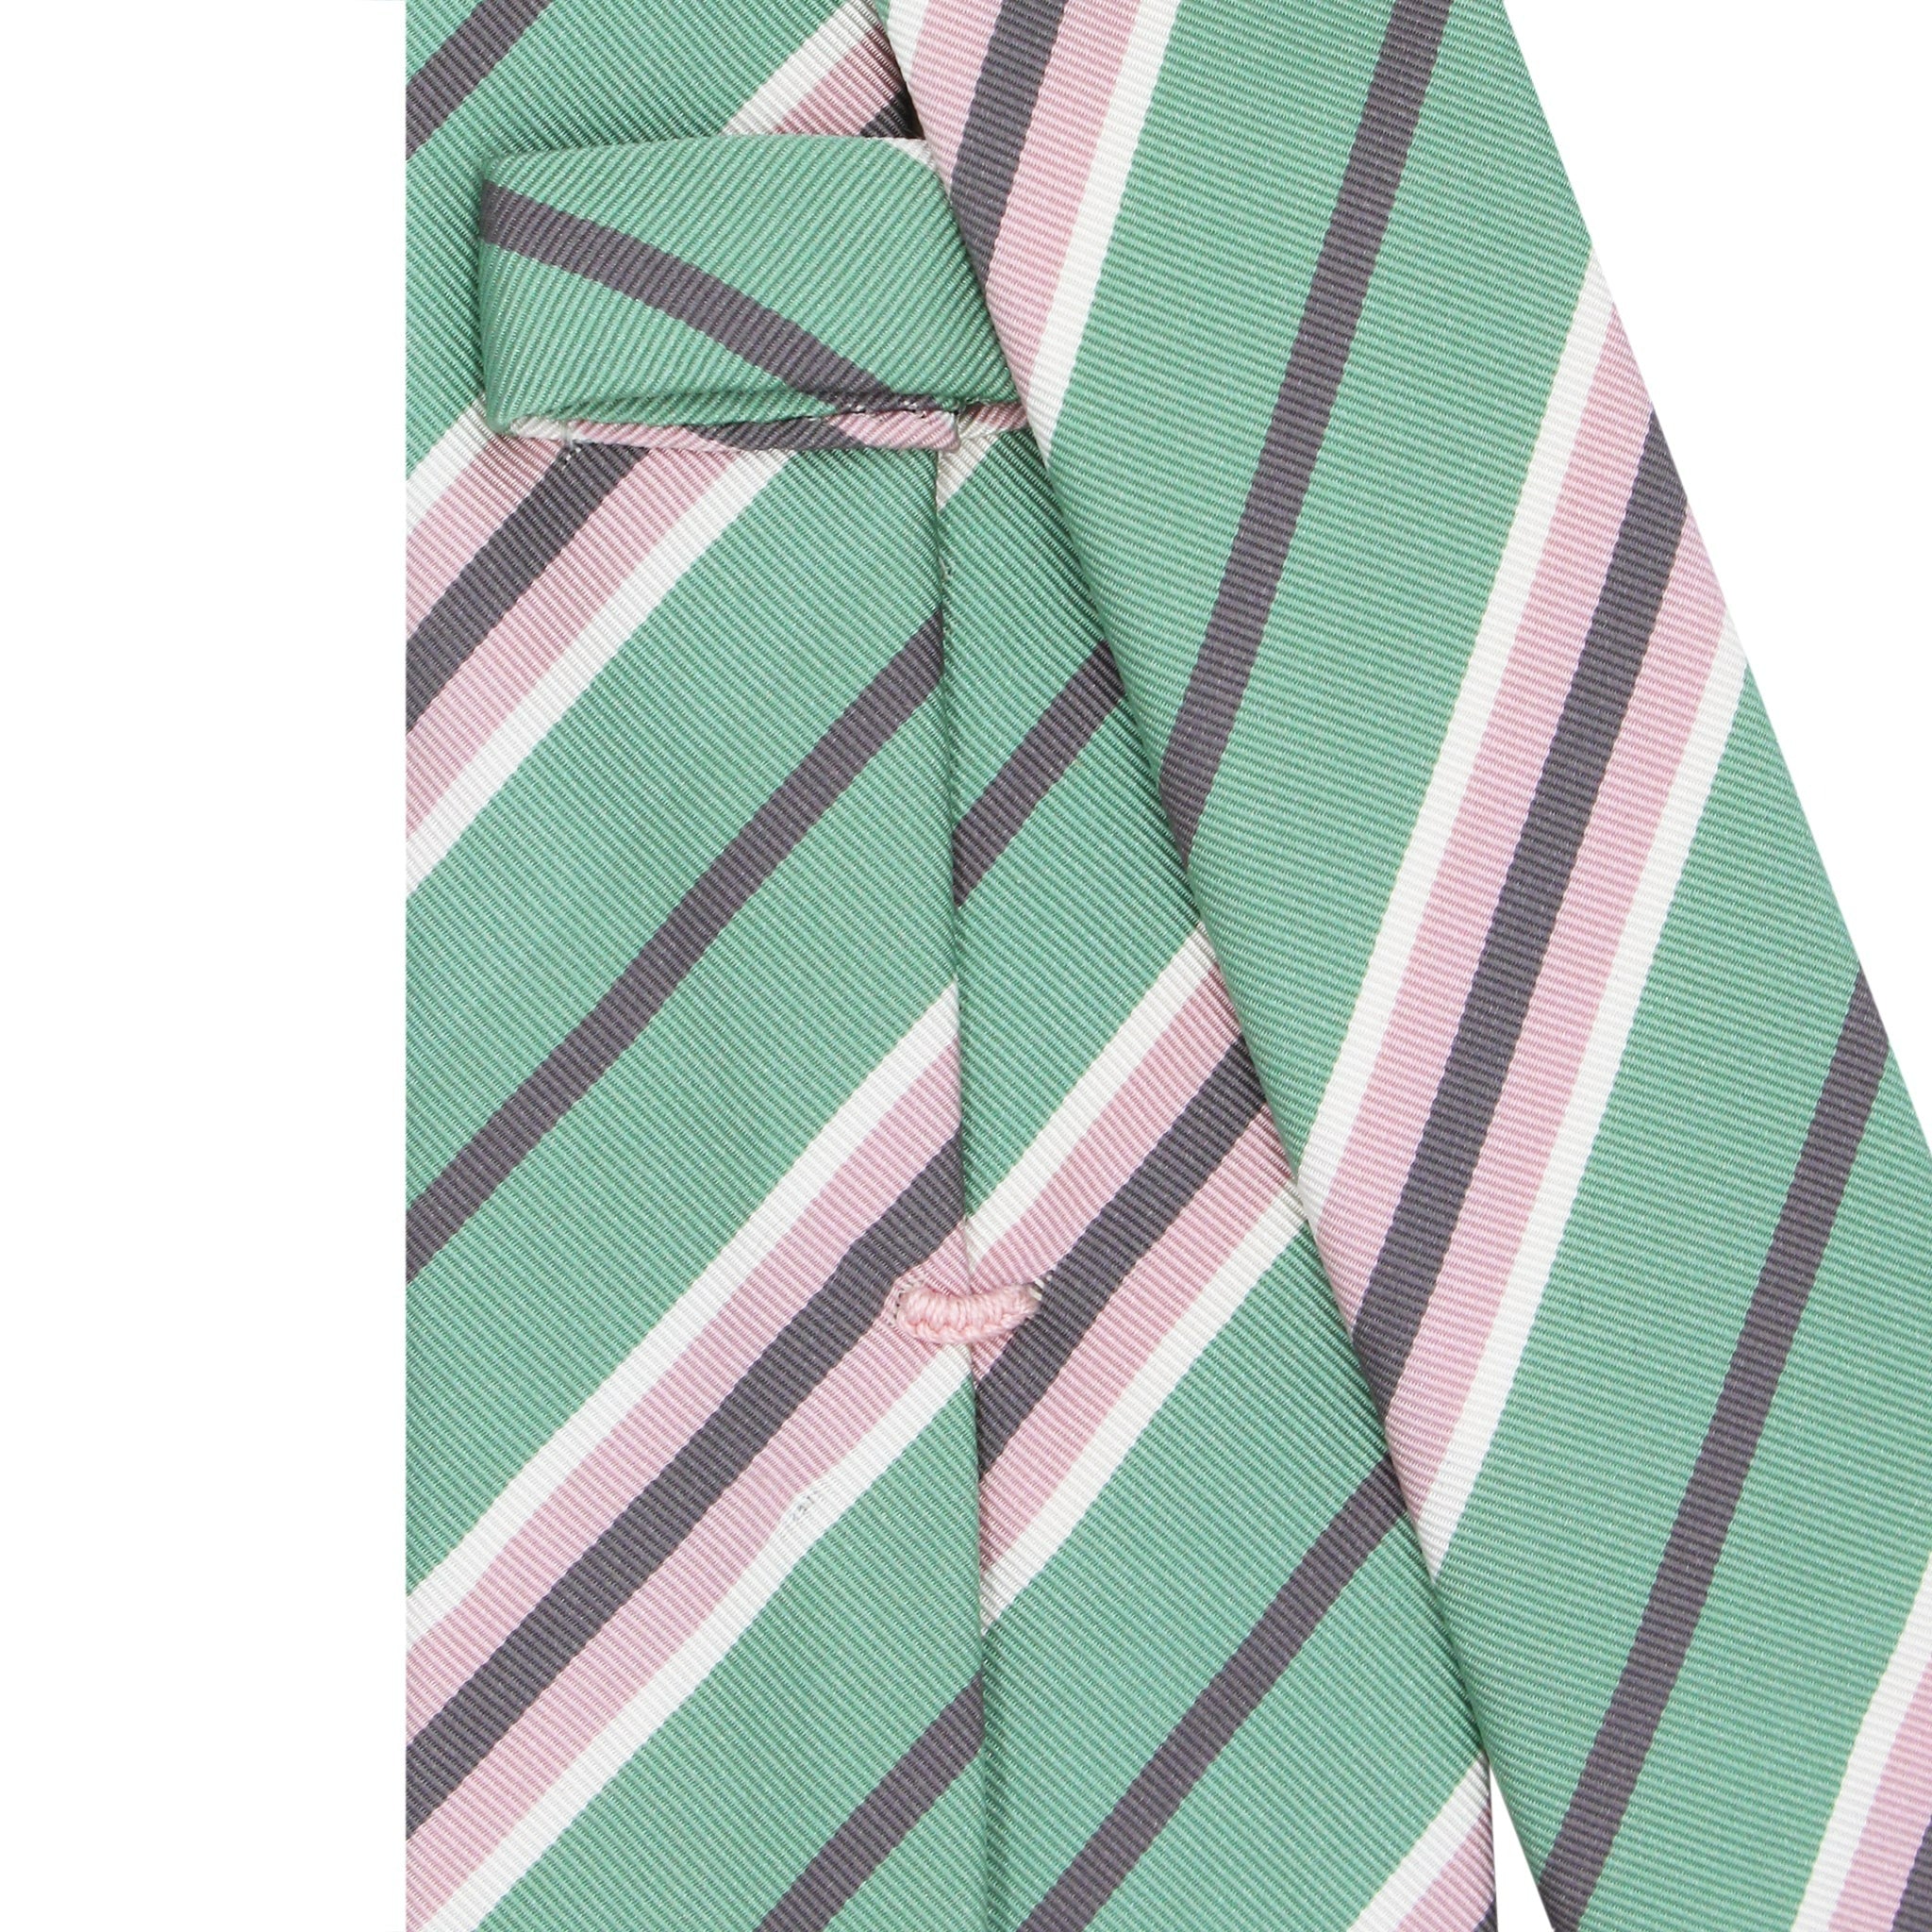 Anversa silk cotton tie green background pink, brown and white bands